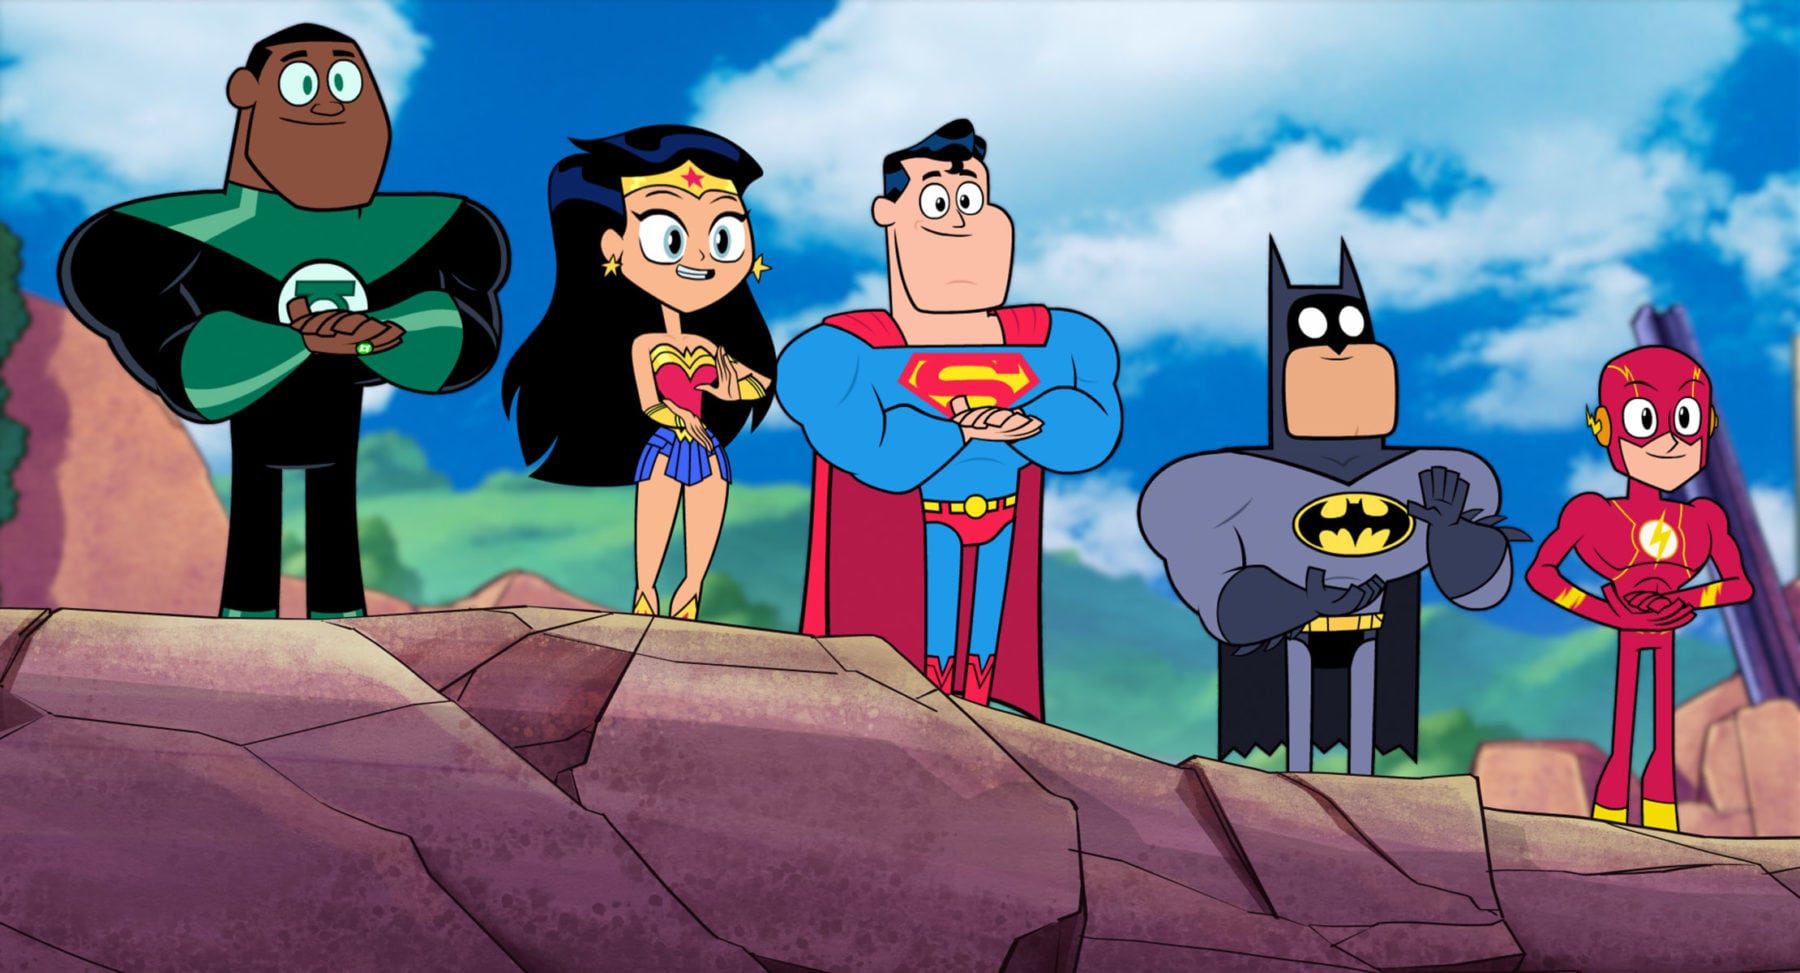 Teen Titans Go! to the Movies gets a batch of new images